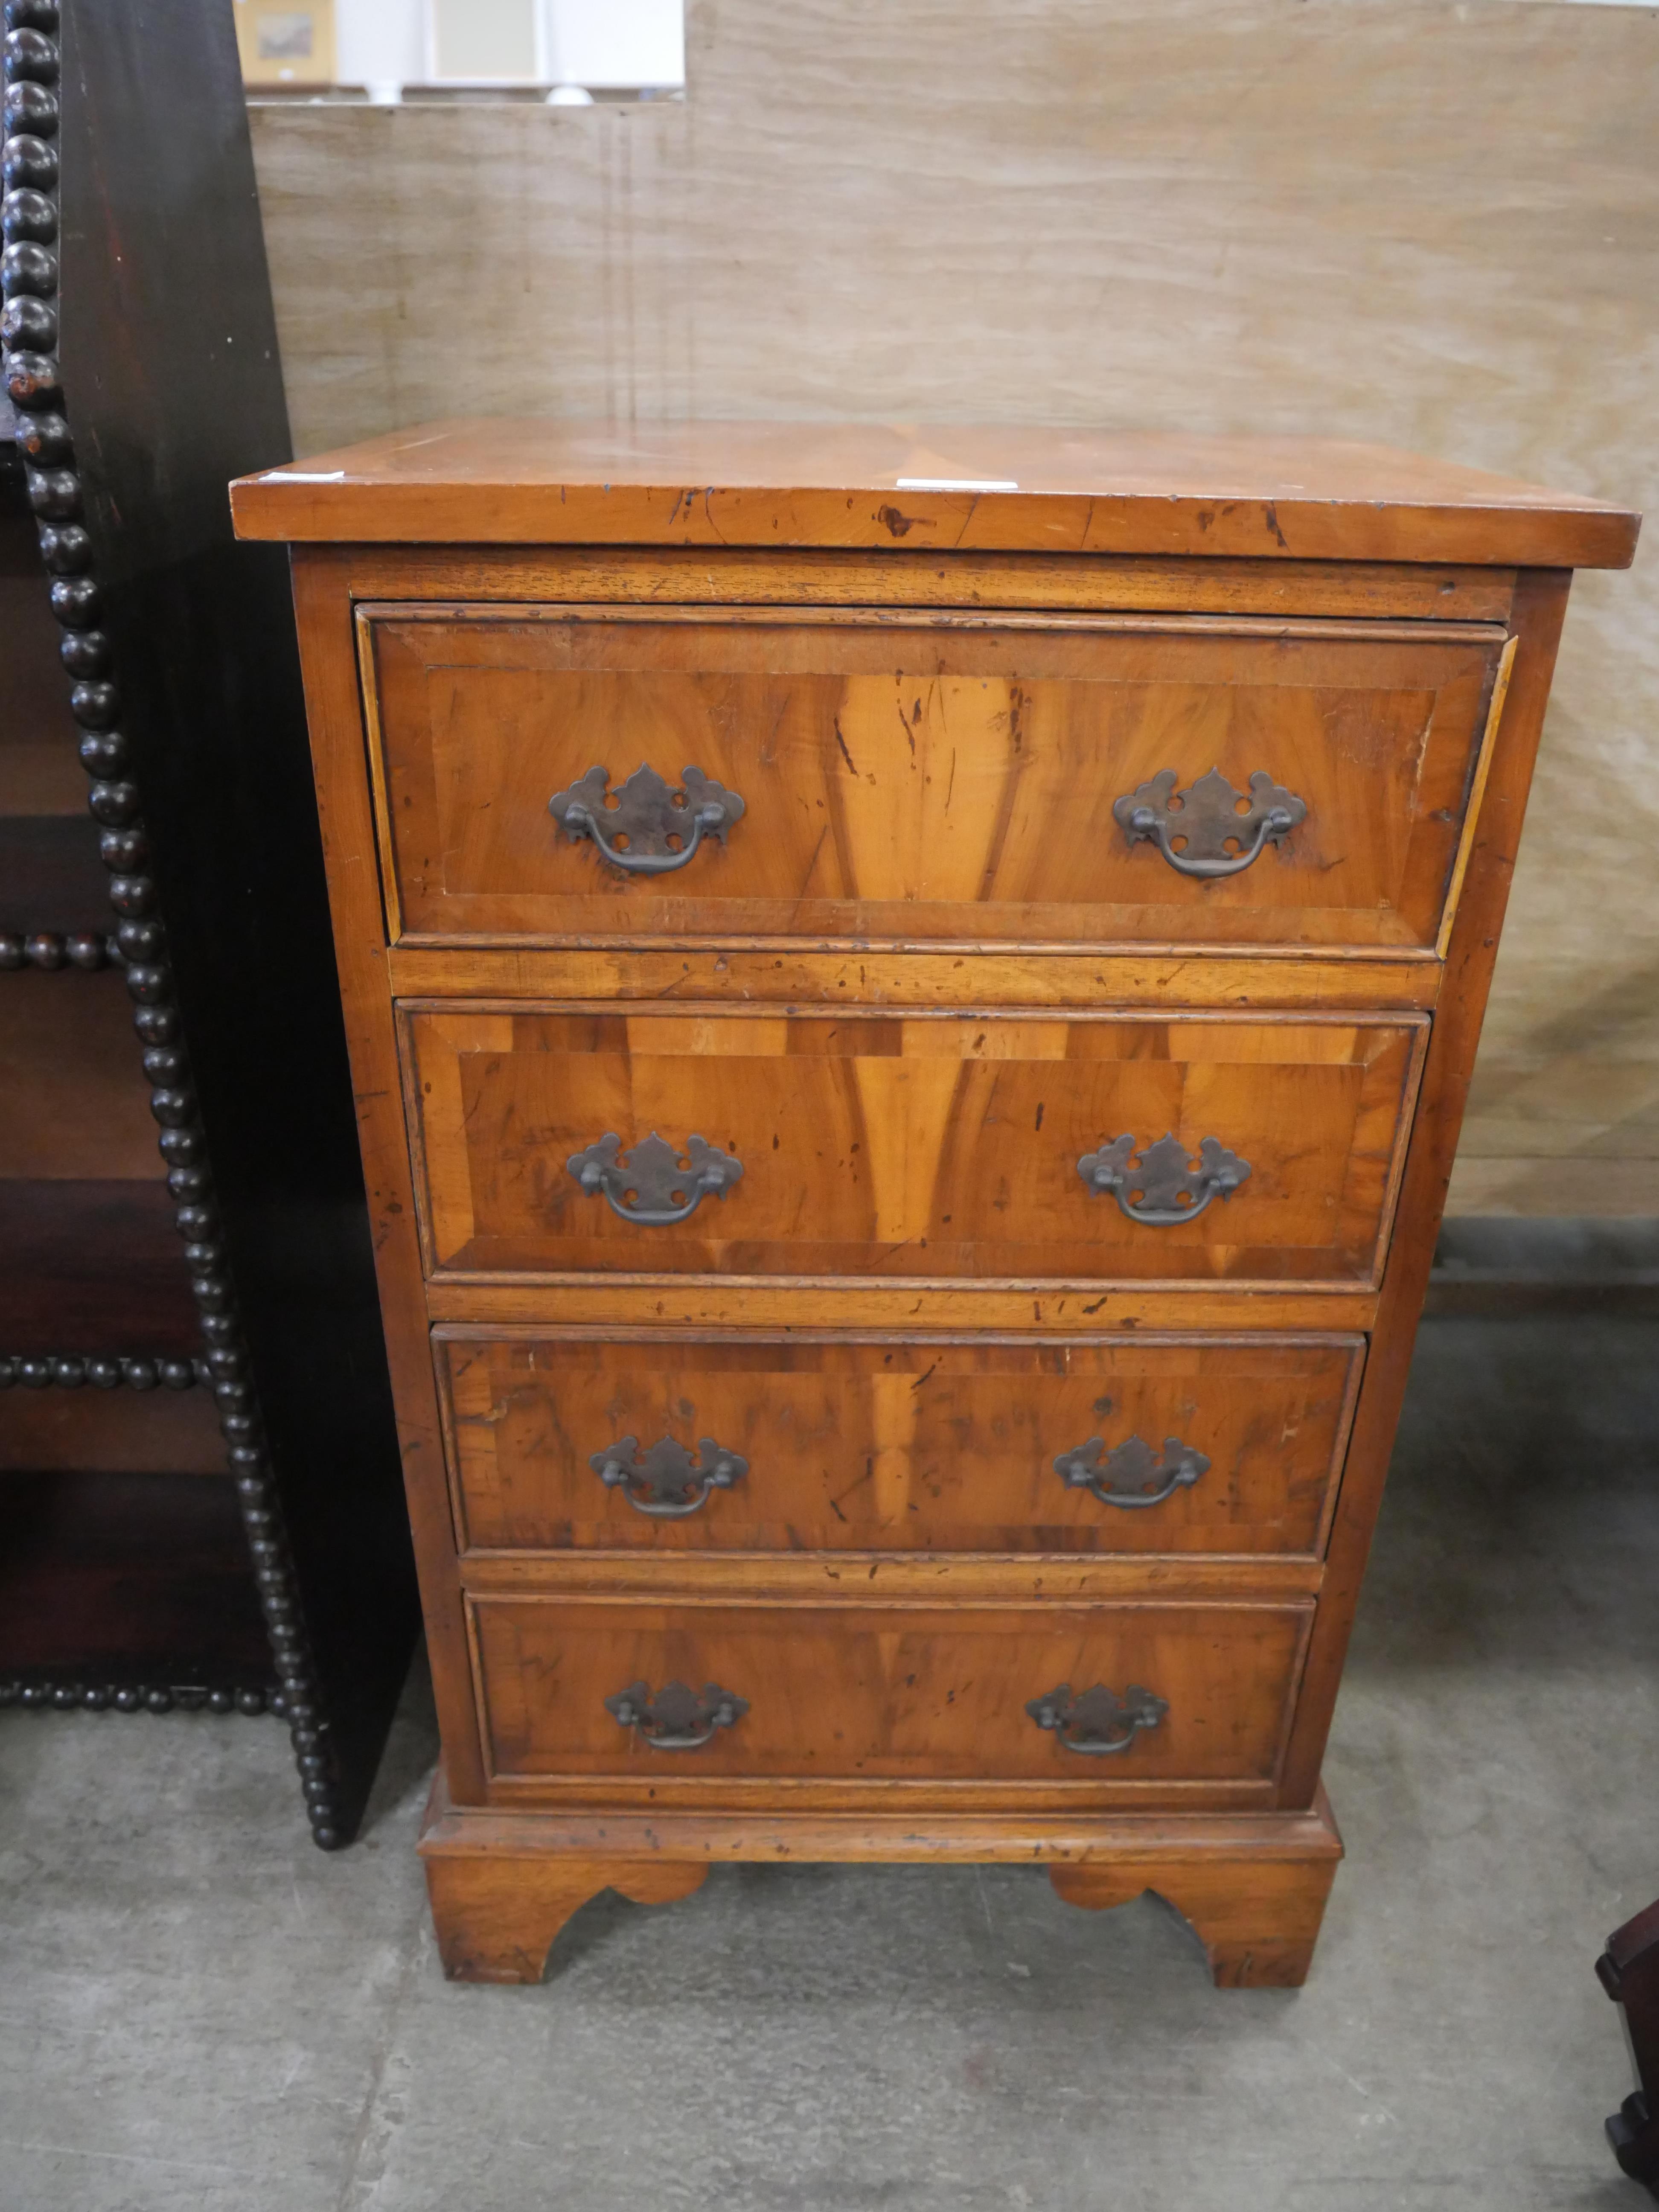 A small George III style yew wood chest of drawers - Image 2 of 3